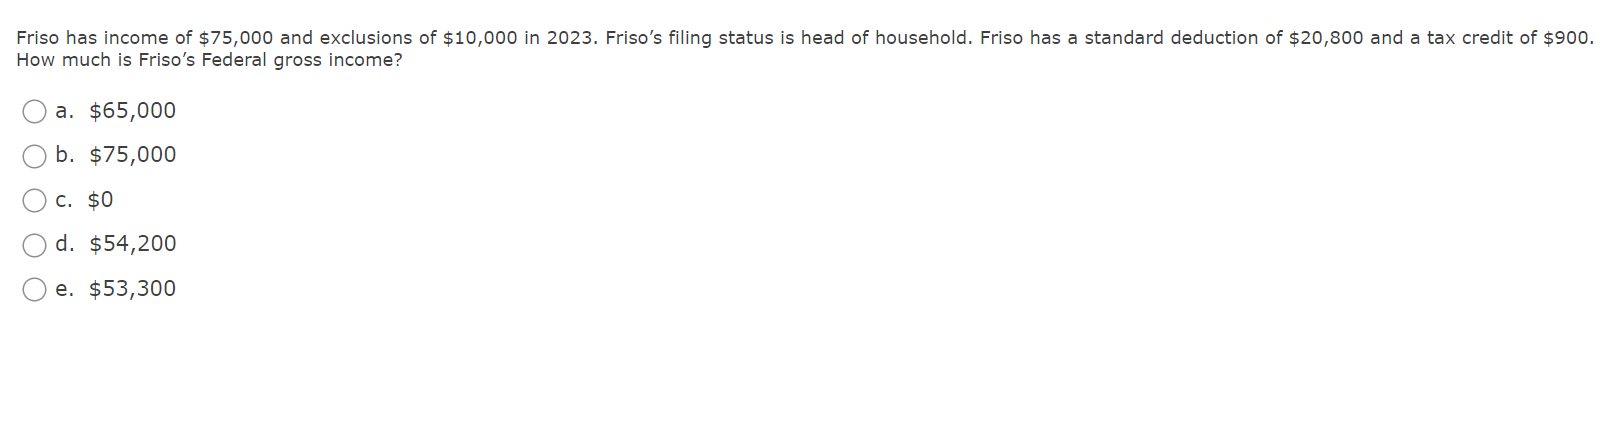 Friso has income of $75,000 and exclusions of $10,000 in 2023. Friso's filing status is head of household.